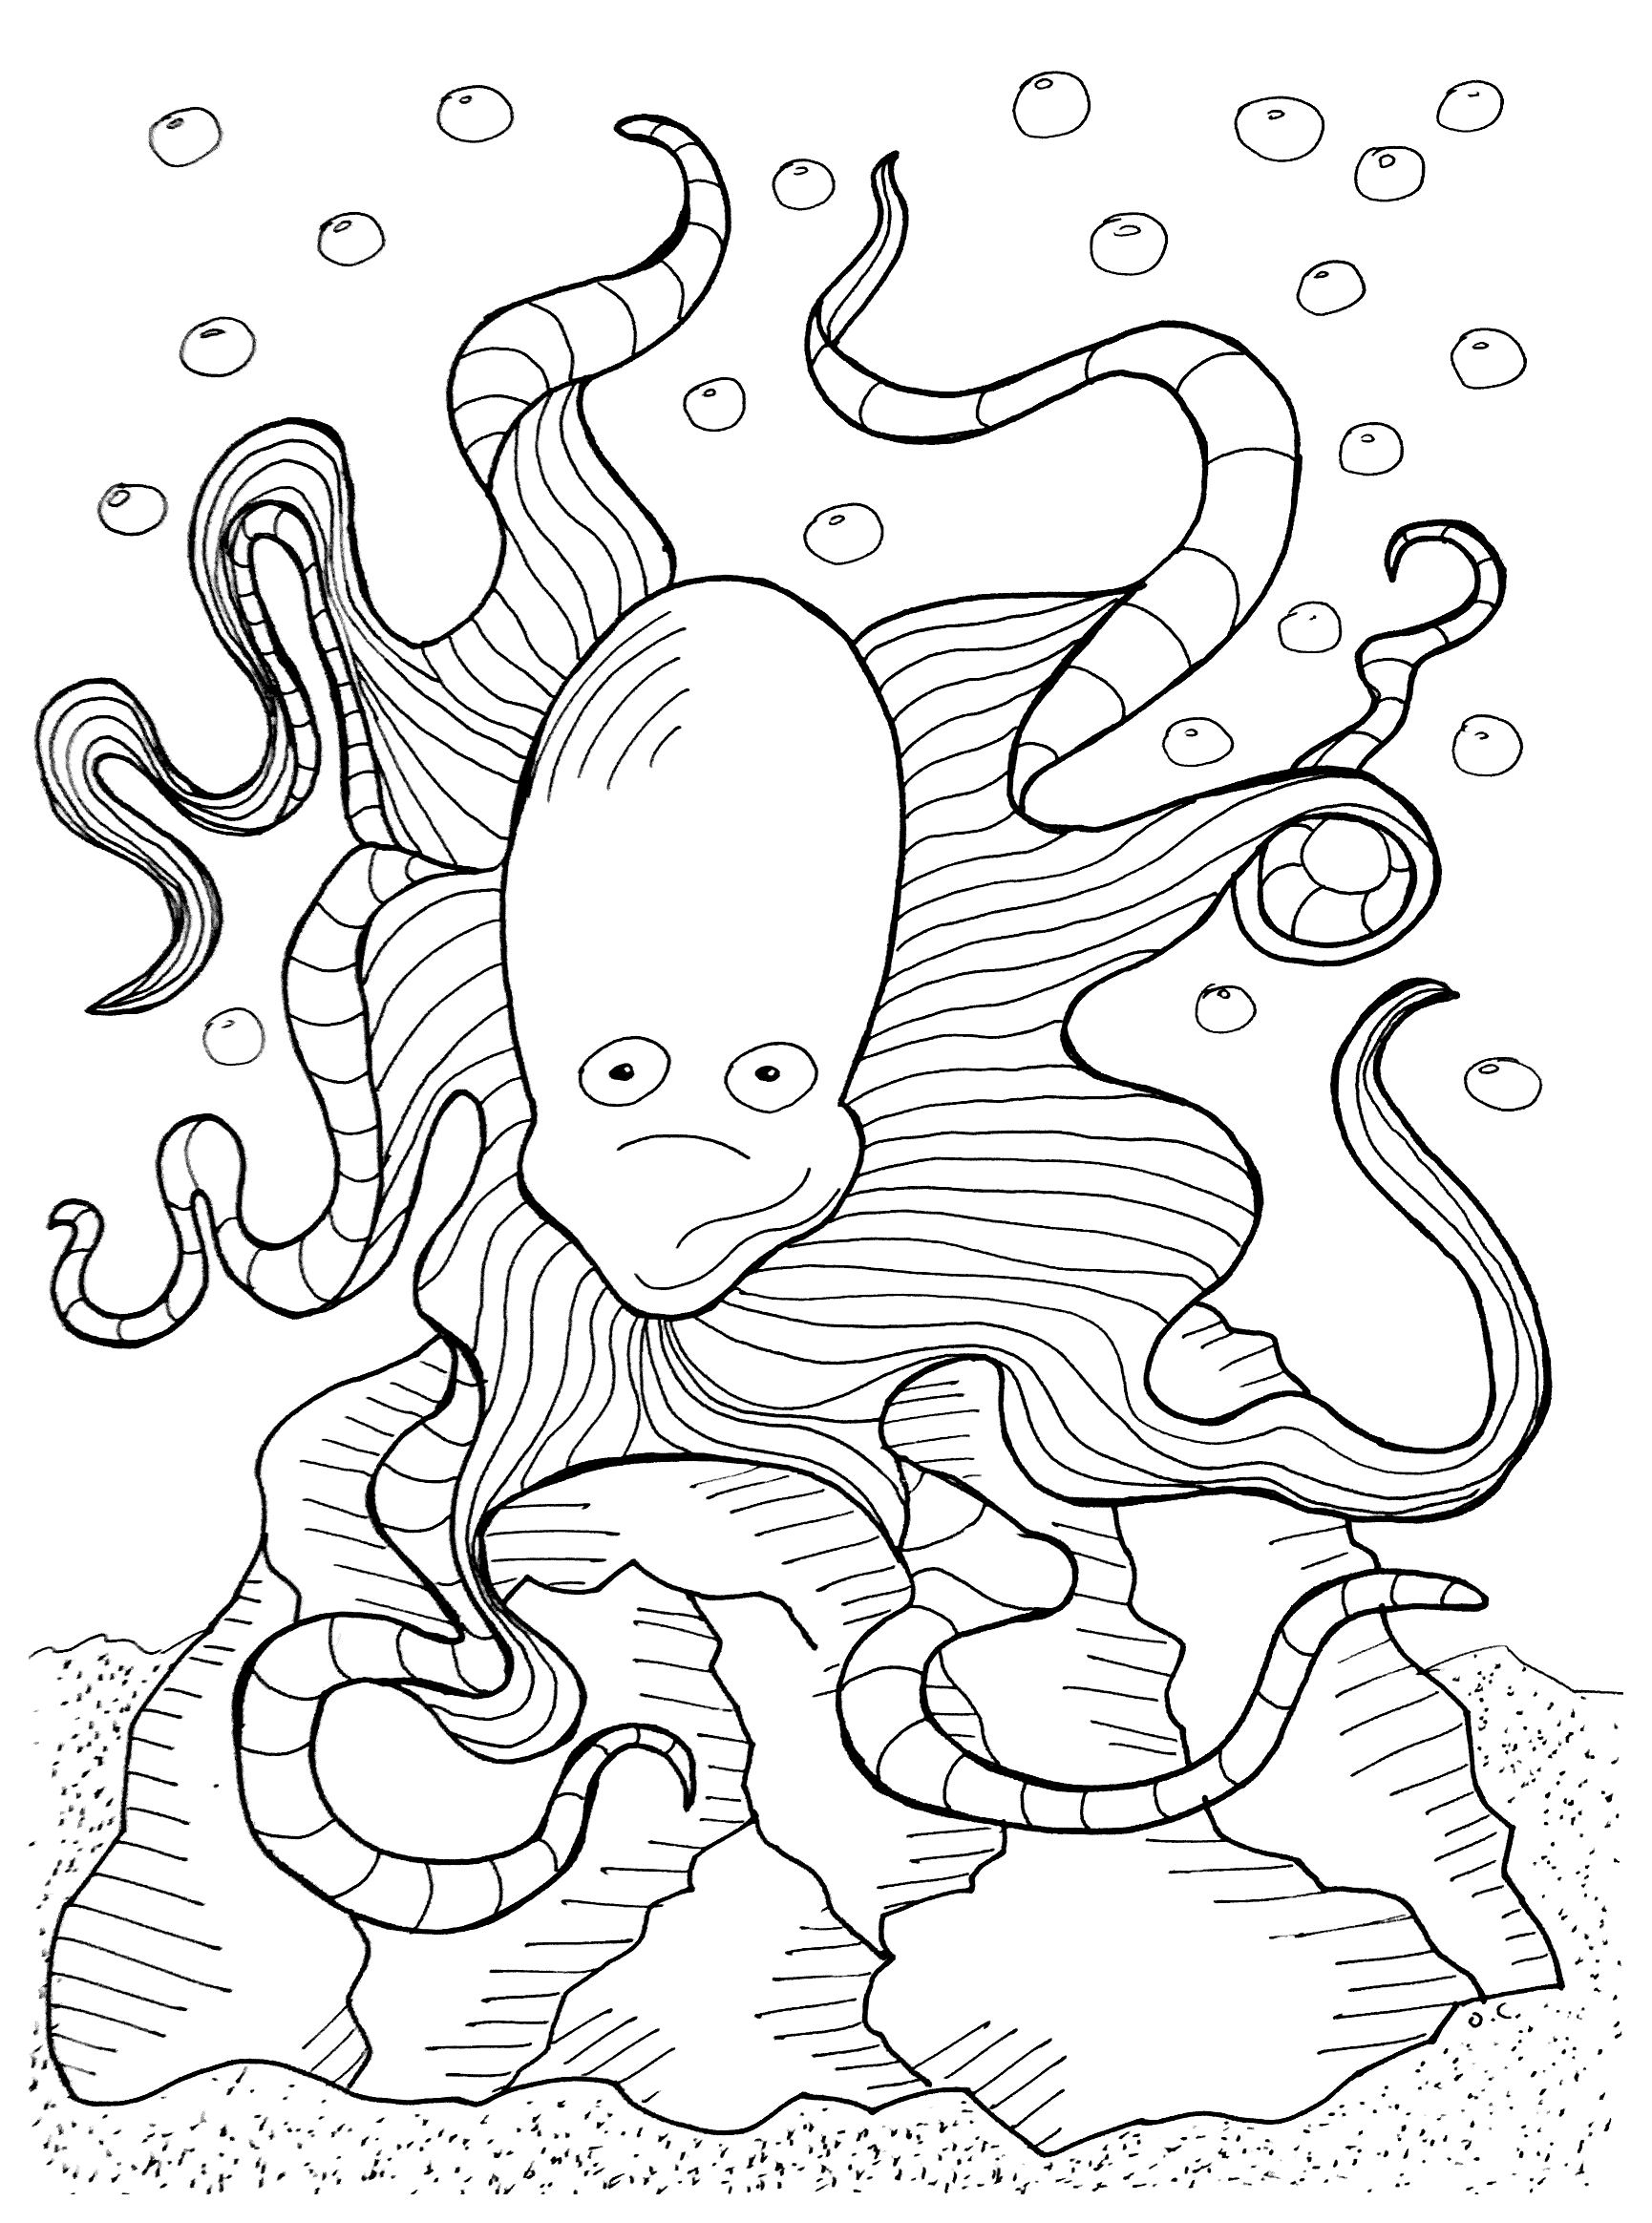 The big and funny Octopus